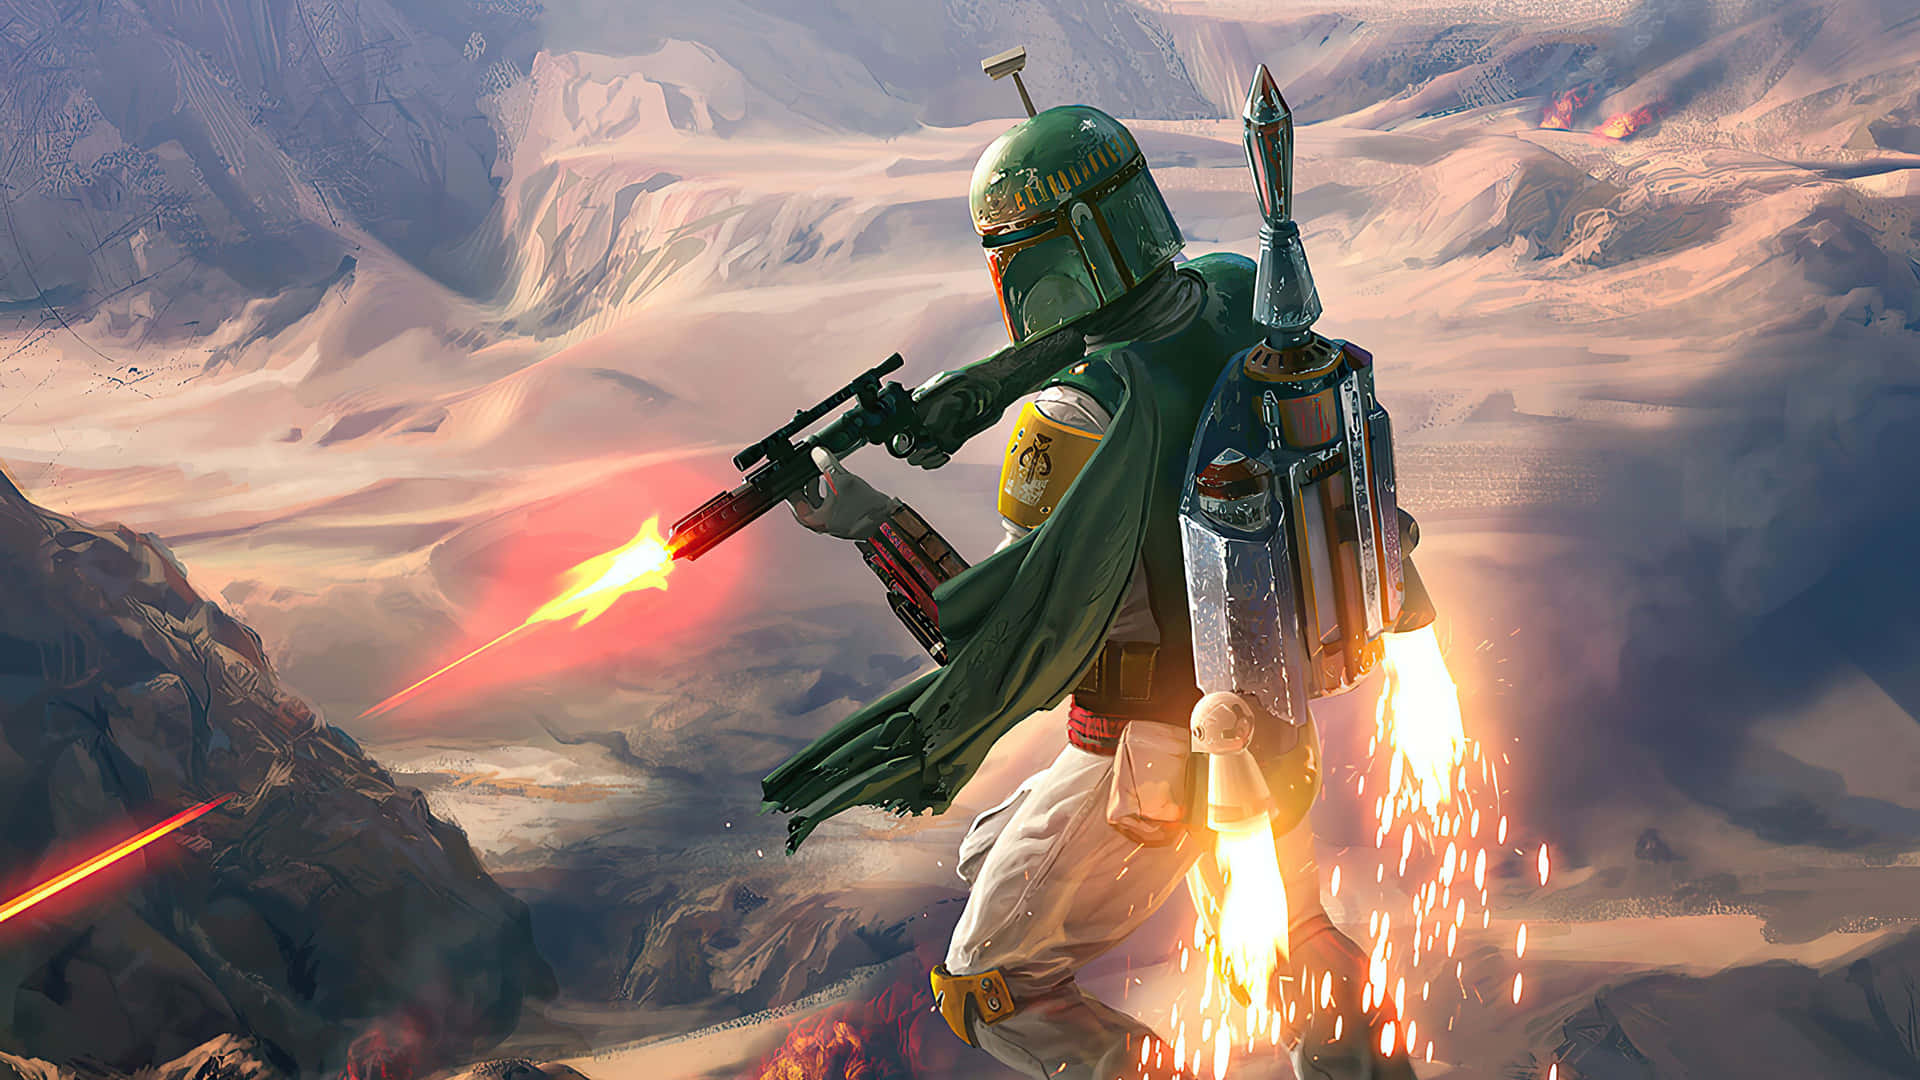 Intimidating Boba Fett Stands Ready in Action